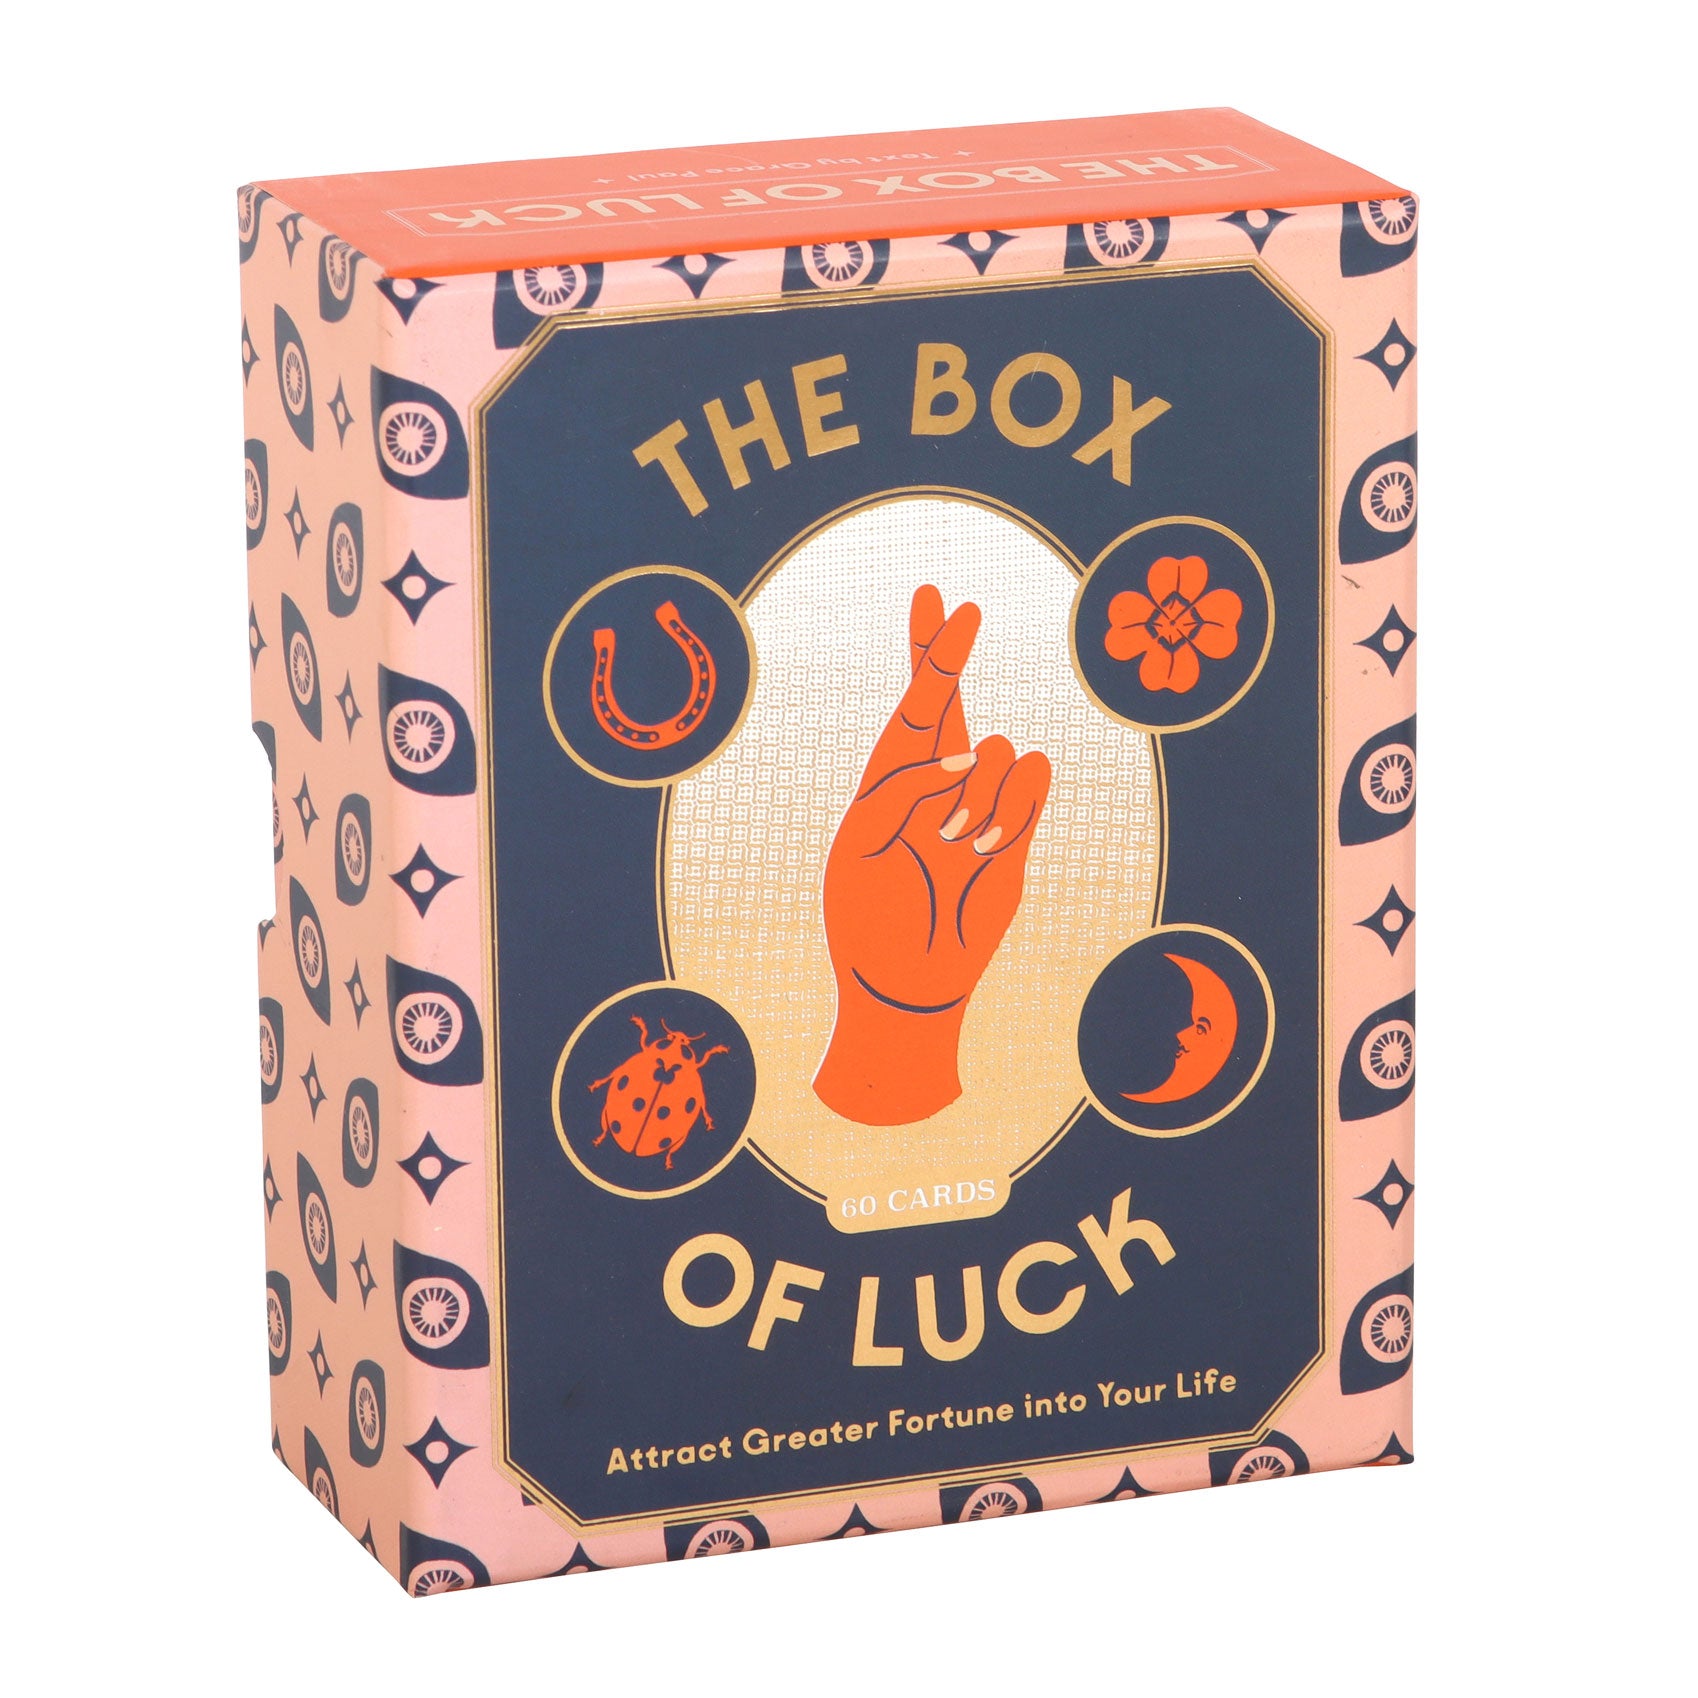 View The Box of Luck Tarot Cards information